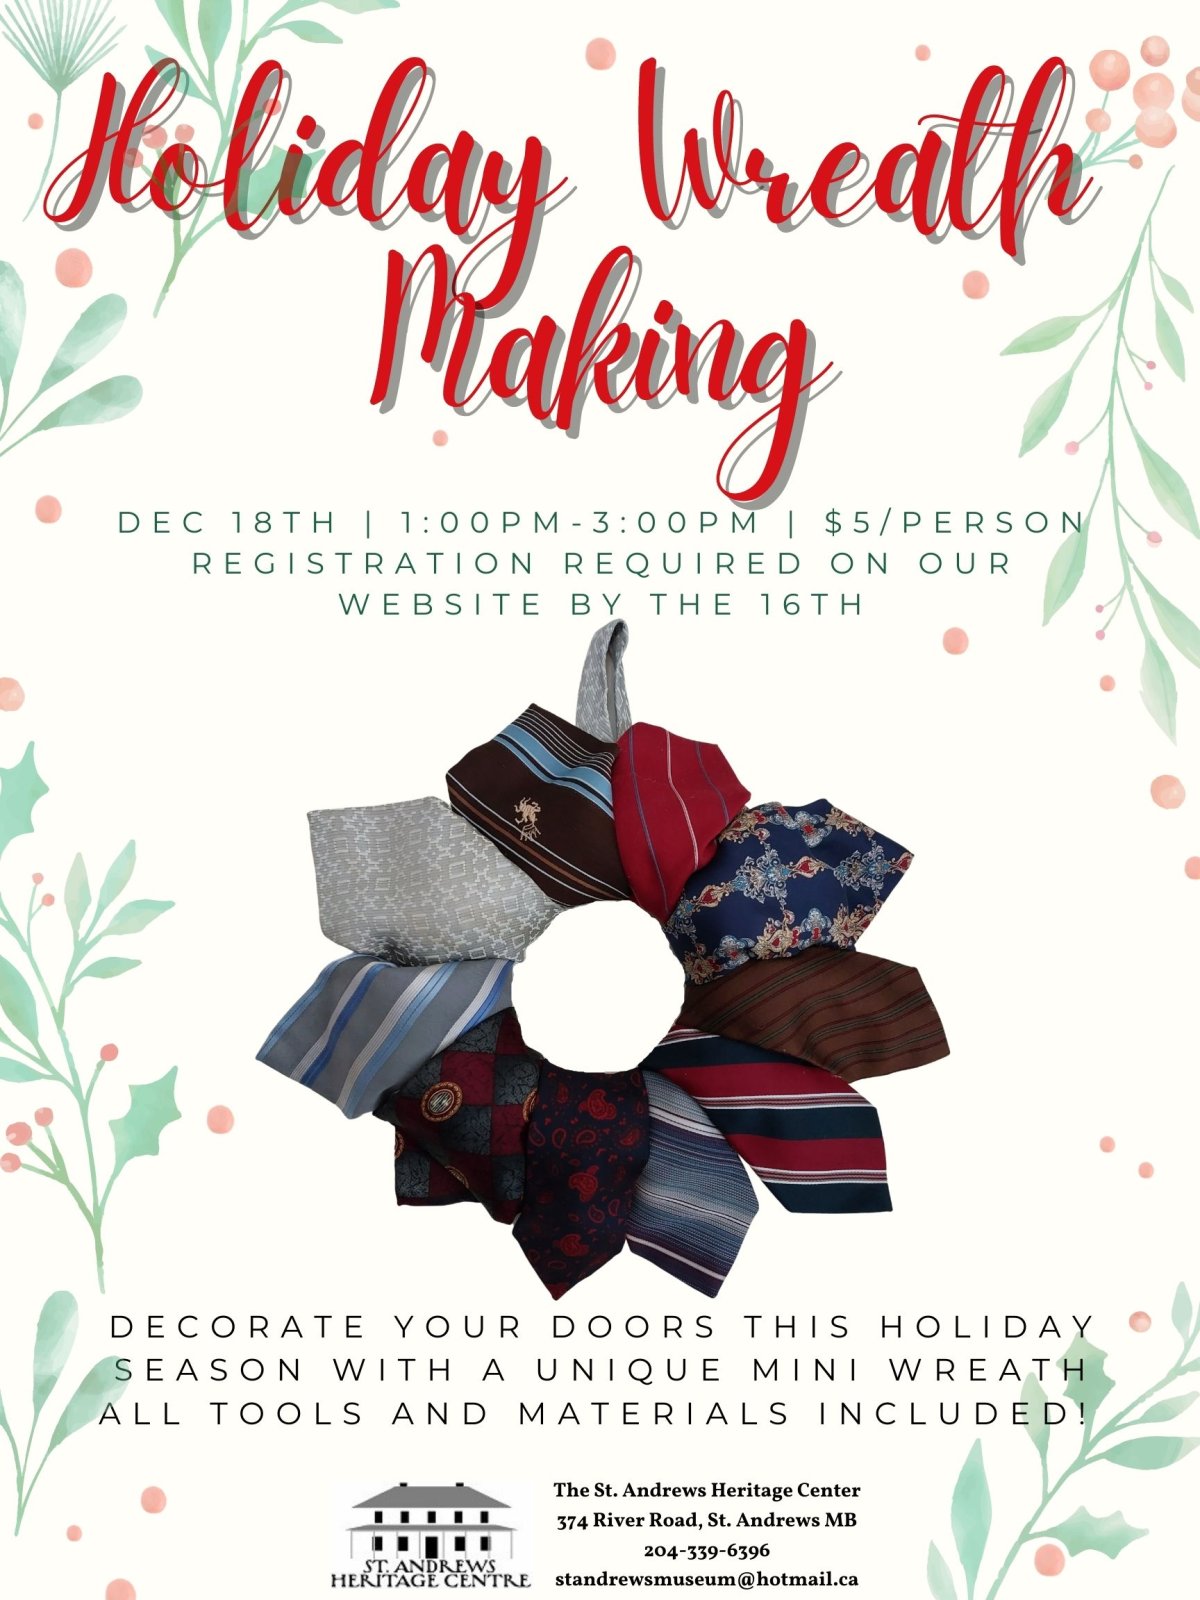 Decorate your doors this holiday season with a unique mini wreath using ties! All tools and materials included! This little wreath could easily be a last minute gift for someone special! Registration required on our website by the 16th!.